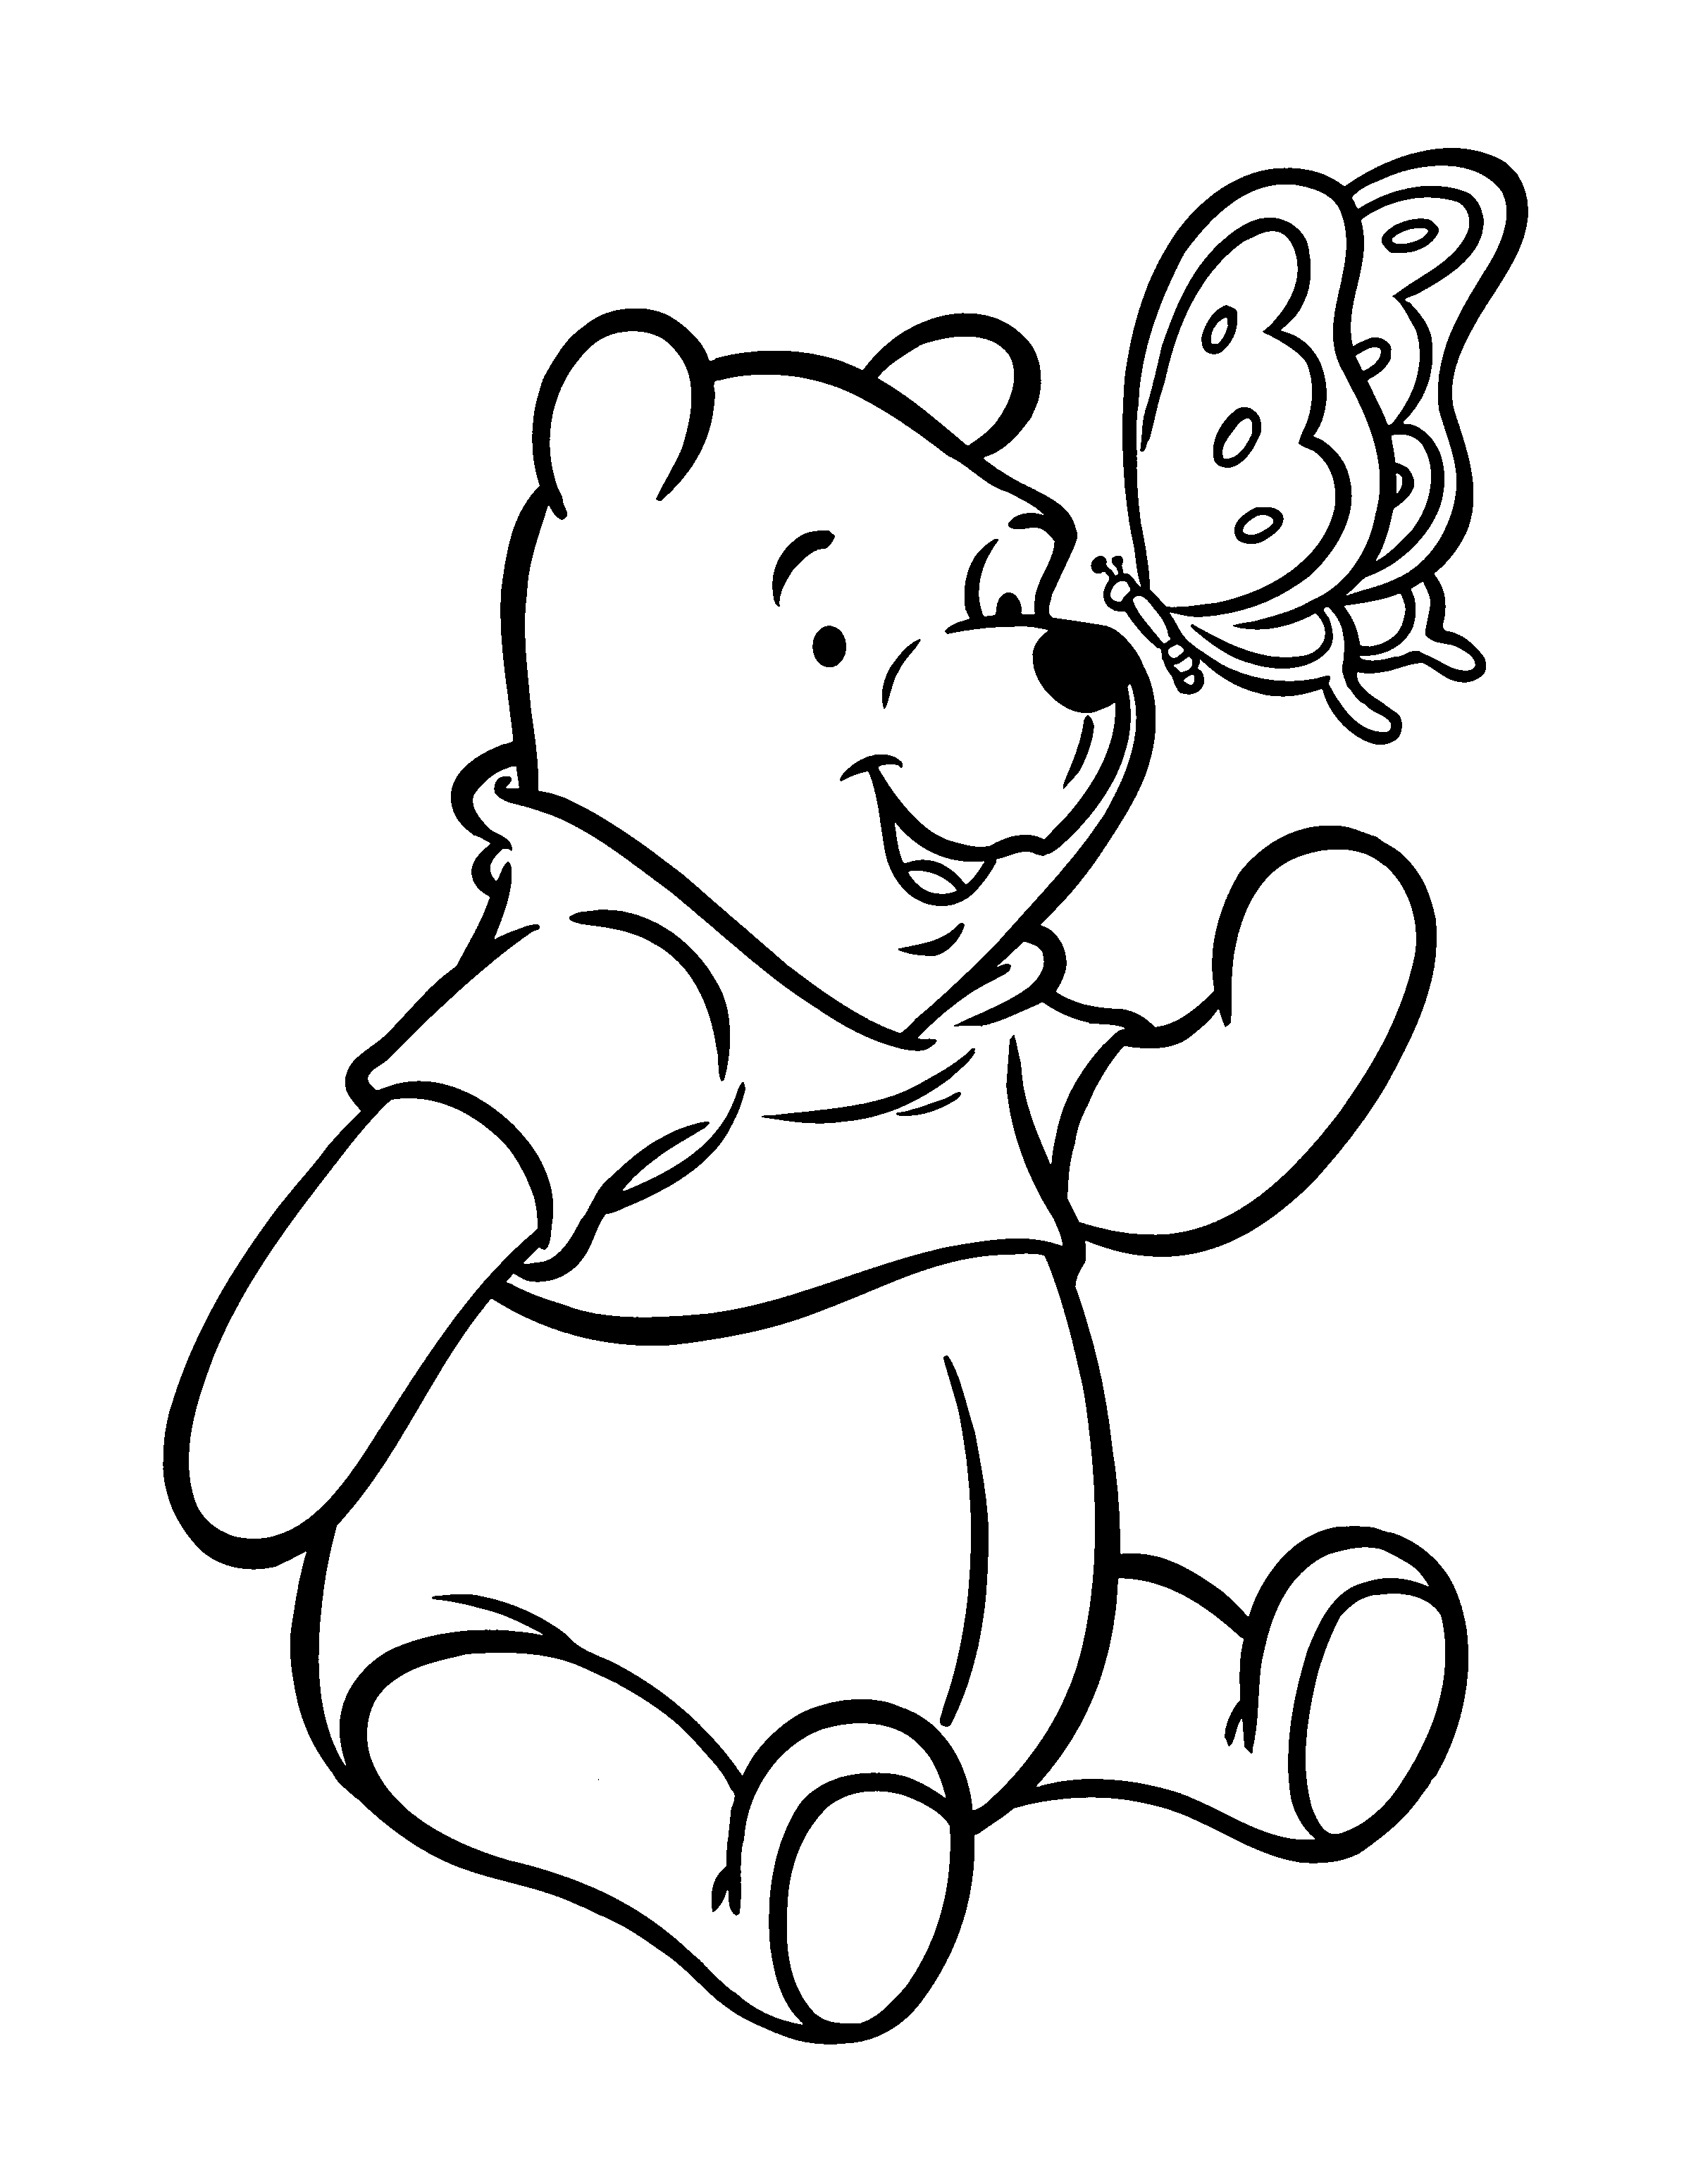 free winnie the pooh coloring pages free printable winnie the pooh coloring pages for kids coloring the pooh pages winnie free 